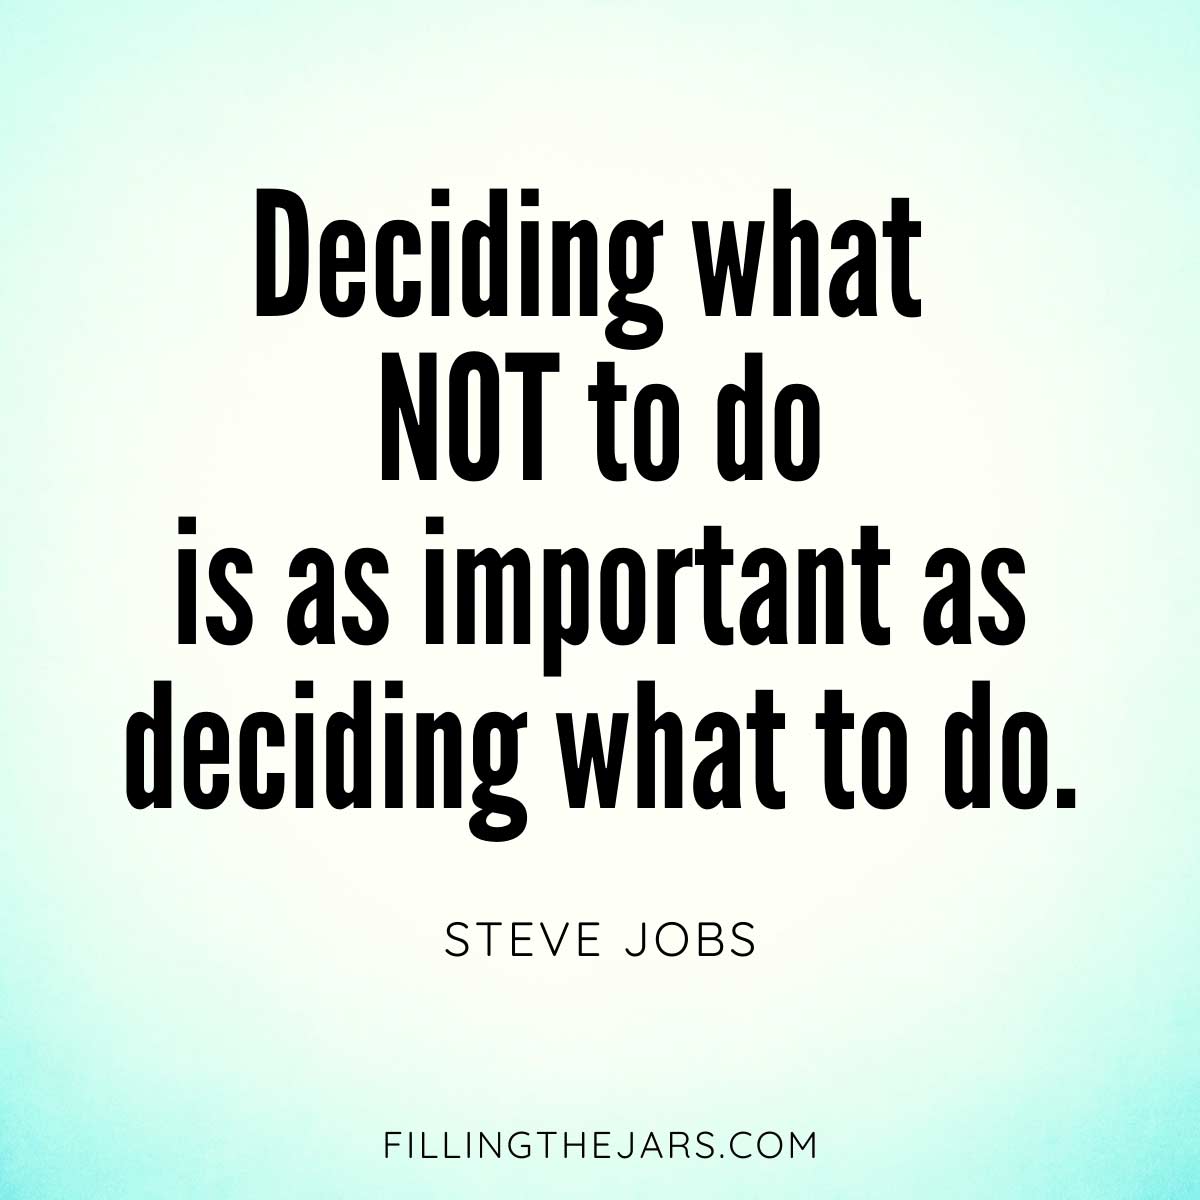 Steve Jobs deciding what not to do quote in black text on pale green and white background.